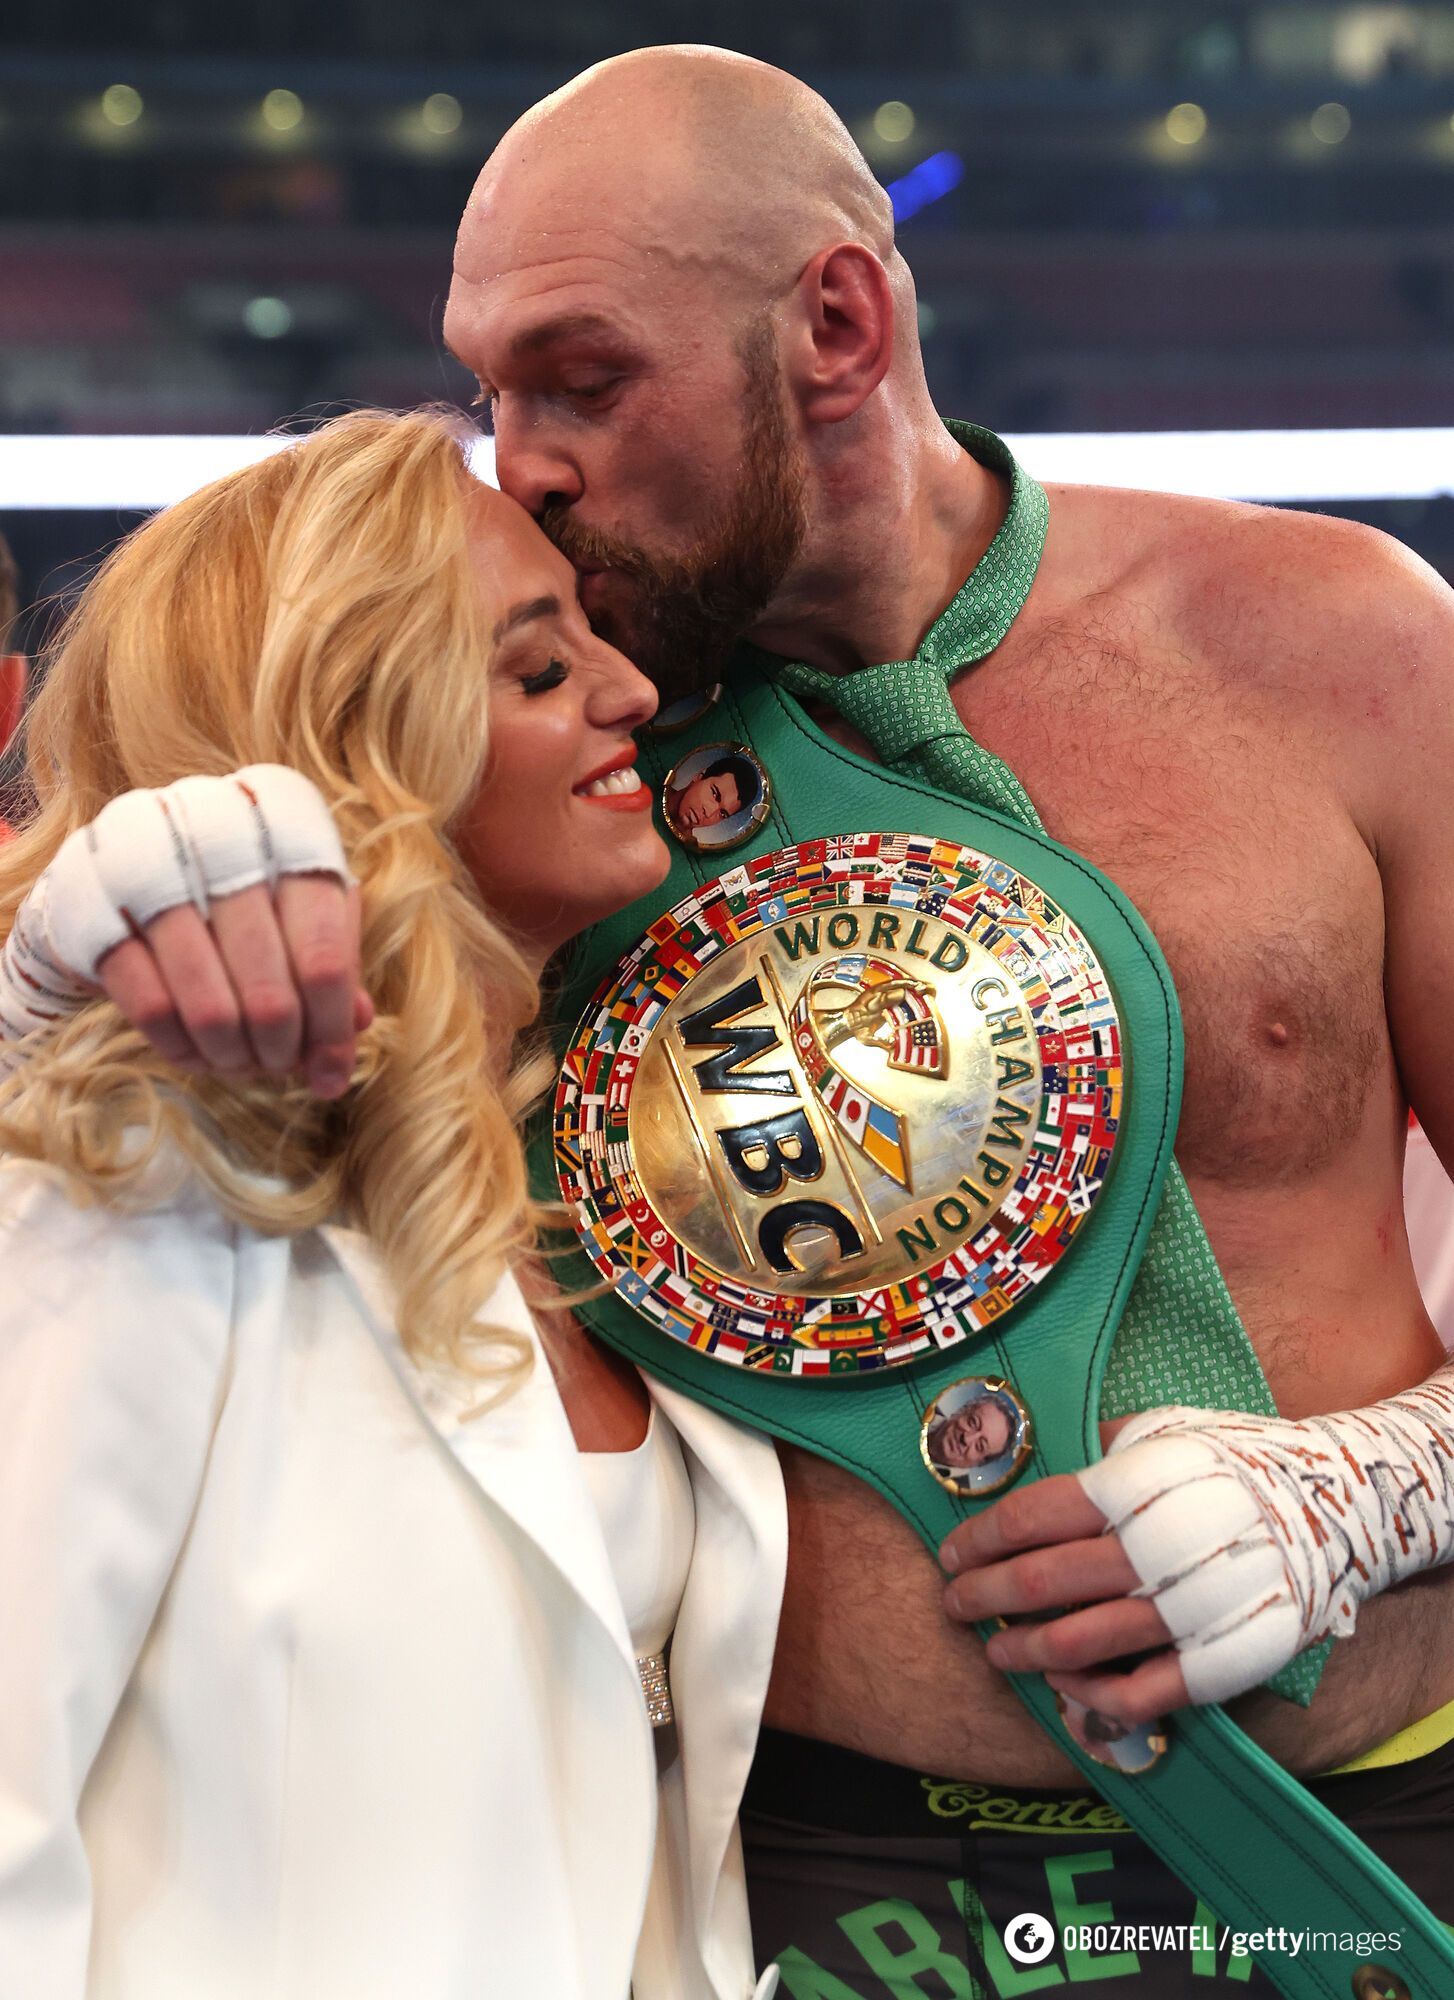 Glamorous mother of 7: what Tyson Fury's wife looks like, with whom they have been together for 20 years. Photo